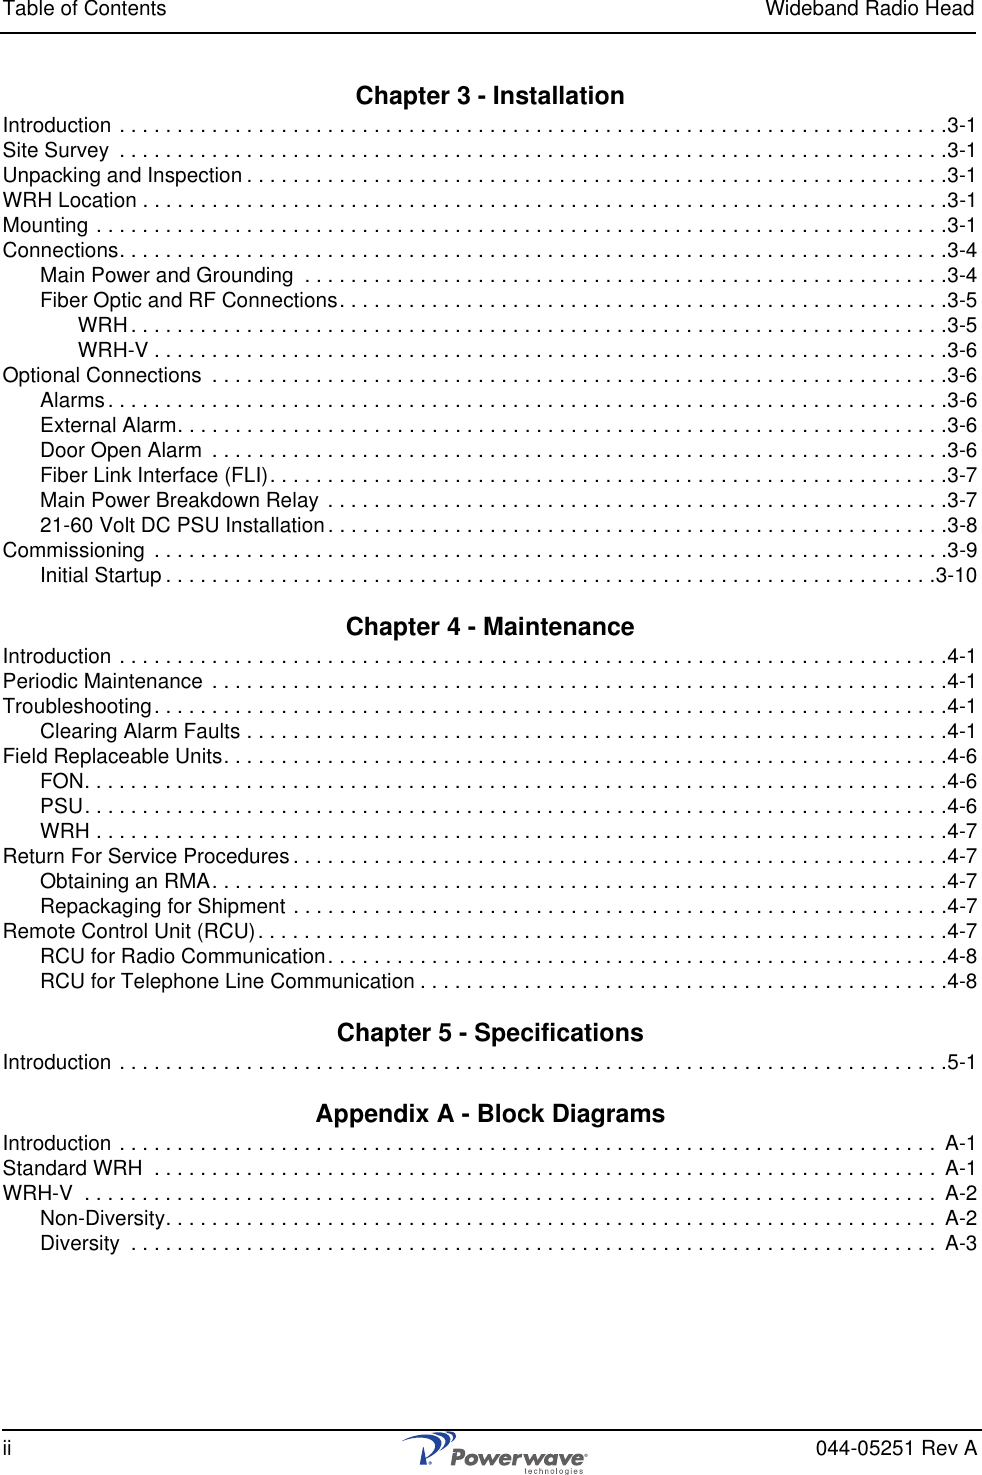 Table of Contents Wideband Radio Headii 044-05251 Rev AChapter 3 - InstallationIntroduction . . . . . . . . . . . . . . . . . . . . . . . . . . . . . . . . . . . . . . . . . . . . . . . . . . . . . . . . . . . . . . . . . . . . . . . .3-1Site Survey  . . . . . . . . . . . . . . . . . . . . . . . . . . . . . . . . . . . . . . . . . . . . . . . . . . . . . . . . . . . . . . . . . . . . . . . .3-1Unpacking and Inspection . . . . . . . . . . . . . . . . . . . . . . . . . . . . . . . . . . . . . . . . . . . . . . . . . . . . . . . . . . . . .3-1WRH Location . . . . . . . . . . . . . . . . . . . . . . . . . . . . . . . . . . . . . . . . . . . . . . . . . . . . . . . . . . . . . . . . . . . . . .3-1Mounting . . . . . . . . . . . . . . . . . . . . . . . . . . . . . . . . . . . . . . . . . . . . . . . . . . . . . . . . . . . . . . . . . . . . . . . . . .3-1Connections. . . . . . . . . . . . . . . . . . . . . . . . . . . . . . . . . . . . . . . . . . . . . . . . . . . . . . . . . . . . . . . . . . . . . . . .3-4Main Power and Grounding  . . . . . . . . . . . . . . . . . . . . . . . . . . . . . . . . . . . . . . . . . . . . . . . . . . . . . . . .3-4Fiber Optic and RF Connections. . . . . . . . . . . . . . . . . . . . . . . . . . . . . . . . . . . . . . . . . . . . . . . . . . . . .3-5WRH . . . . . . . . . . . . . . . . . . . . . . . . . . . . . . . . . . . . . . . . . . . . . . . . . . . . . . . . . . . . . . . . . . . . . . .3-5WRH-V . . . . . . . . . . . . . . . . . . . . . . . . . . . . . . . . . . . . . . . . . . . . . . . . . . . . . . . . . . . . . . . . . . . . .3-6Optional Connections  . . . . . . . . . . . . . . . . . . . . . . . . . . . . . . . . . . . . . . . . . . . . . . . . . . . . . . . . . . . . . . . .3-6Alarms. . . . . . . . . . . . . . . . . . . . . . . . . . . . . . . . . . . . . . . . . . . . . . . . . . . . . . . . . . . . . . . . . . . . . . . . .3-6External Alarm. . . . . . . . . . . . . . . . . . . . . . . . . . . . . . . . . . . . . . . . . . . . . . . . . . . . . . . . . . . . . . . . . . .3-6Door Open Alarm  . . . . . . . . . . . . . . . . . . . . . . . . . . . . . . . . . . . . . . . . . . . . . . . . . . . . . . . . . . . . . . . .3-6Fiber Link Interface (FLI). . . . . . . . . . . . . . . . . . . . . . . . . . . . . . . . . . . . . . . . . . . . . . . . . . . . . . . . . . .3-7Main Power Breakdown Relay . . . . . . . . . . . . . . . . . . . . . . . . . . . . . . . . . . . . . . . . . . . . . . . . . . . . . .3-721-60 Volt DC PSU Installation . . . . . . . . . . . . . . . . . . . . . . . . . . . . . . . . . . . . . . . . . . . . . . . . . . . . . .3-8Commissioning  . . . . . . . . . . . . . . . . . . . . . . . . . . . . . . . . . . . . . . . . . . . . . . . . . . . . . . . . . . . . . . . . . . . . .3-9Initial Startup . . . . . . . . . . . . . . . . . . . . . . . . . . . . . . . . . . . . . . . . . . . . . . . . . . . . . . . . . . . . . . . . . . .3-10Chapter 4 - MaintenanceIntroduction . . . . . . . . . . . . . . . . . . . . . . . . . . . . . . . . . . . . . . . . . . . . . . . . . . . . . . . . . . . . . . . . . . . . . . . .4-1Periodic Maintenance  . . . . . . . . . . . . . . . . . . . . . . . . . . . . . . . . . . . . . . . . . . . . . . . . . . . . . . . . . . . . . . . .4-1Troubleshooting. . . . . . . . . . . . . . . . . . . . . . . . . . . . . . . . . . . . . . . . . . . . . . . . . . . . . . . . . . . . . . . . . . . . .4-1Clearing Alarm Faults . . . . . . . . . . . . . . . . . . . . . . . . . . . . . . . . . . . . . . . . . . . . . . . . . . . . . . . . . . . . .4-1Field Replaceable Units. . . . . . . . . . . . . . . . . . . . . . . . . . . . . . . . . . . . . . . . . . . . . . . . . . . . . . . . . . . . . . .4-6FON. . . . . . . . . . . . . . . . . . . . . . . . . . . . . . . . . . . . . . . . . . . . . . . . . . . . . . . . . . . . . . . . . . . . . . . . . . .4-6PSU. . . . . . . . . . . . . . . . . . . . . . . . . . . . . . . . . . . . . . . . . . . . . . . . . . . . . . . . . . . . . . . . . . . . . . . . . . .4-6WRH . . . . . . . . . . . . . . . . . . . . . . . . . . . . . . . . . . . . . . . . . . . . . . . . . . . . . . . . . . . . . . . . . . . . . . . . . .4-7Return For Service Procedures . . . . . . . . . . . . . . . . . . . . . . . . . . . . . . . . . . . . . . . . . . . . . . . . . . . . . . . . .4-7Obtaining an RMA. . . . . . . . . . . . . . . . . . . . . . . . . . . . . . . . . . . . . . . . . . . . . . . . . . . . . . . . . . . . . . . .4-7Repackaging for Shipment . . . . . . . . . . . . . . . . . . . . . . . . . . . . . . . . . . . . . . . . . . . . . . . . . . . . . . . . .4-7Remote Control Unit (RCU). . . . . . . . . . . . . . . . . . . . . . . . . . . . . . . . . . . . . . . . . . . . . . . . . . . . . . . . . . . .4-7RCU for Radio Communication. . . . . . . . . . . . . . . . . . . . . . . . . . . . . . . . . . . . . . . . . . . . . . . . . . . . . .4-8RCU for Telephone Line Communication . . . . . . . . . . . . . . . . . . . . . . . . . . . . . . . . . . . . . . . . . . . . . .4-8Chapter 5 - SpecificationsIntroduction . . . . . . . . . . . . . . . . . . . . . . . . . . . . . . . . . . . . . . . . . . . . . . . . . . . . . . . . . . . . . . . . . . . . . . . .5-1Appendix A - Block DiagramsIntroduction . . . . . . . . . . . . . . . . . . . . . . . . . . . . . . . . . . . . . . . . . . . . . . . . . . . . . . . . . . . . . . . . . . . . . . .  A-1Standard WRH  . . . . . . . . . . . . . . . . . . . . . . . . . . . . . . . . . . . . . . . . . . . . . . . . . . . . . . . . . . . . . . . . . . . .  A-1WRH-V  . . . . . . . . . . . . . . . . . . . . . . . . . . . . . . . . . . . . . . . . . . . . . . . . . . . . . . . . . . . . . . . . . . . . . . . . . .  A-2Non-Diversity. . . . . . . . . . . . . . . . . . . . . . . . . . . . . . . . . . . . . . . . . . . . . . . . . . . . . . . . . . . . . . . . . . .  A-2Diversity  . . . . . . . . . . . . . . . . . . . . . . . . . . . . . . . . . . . . . . . . . . . . . . . . . . . . . . . . . . . . . . . . . . . . . .  A-3